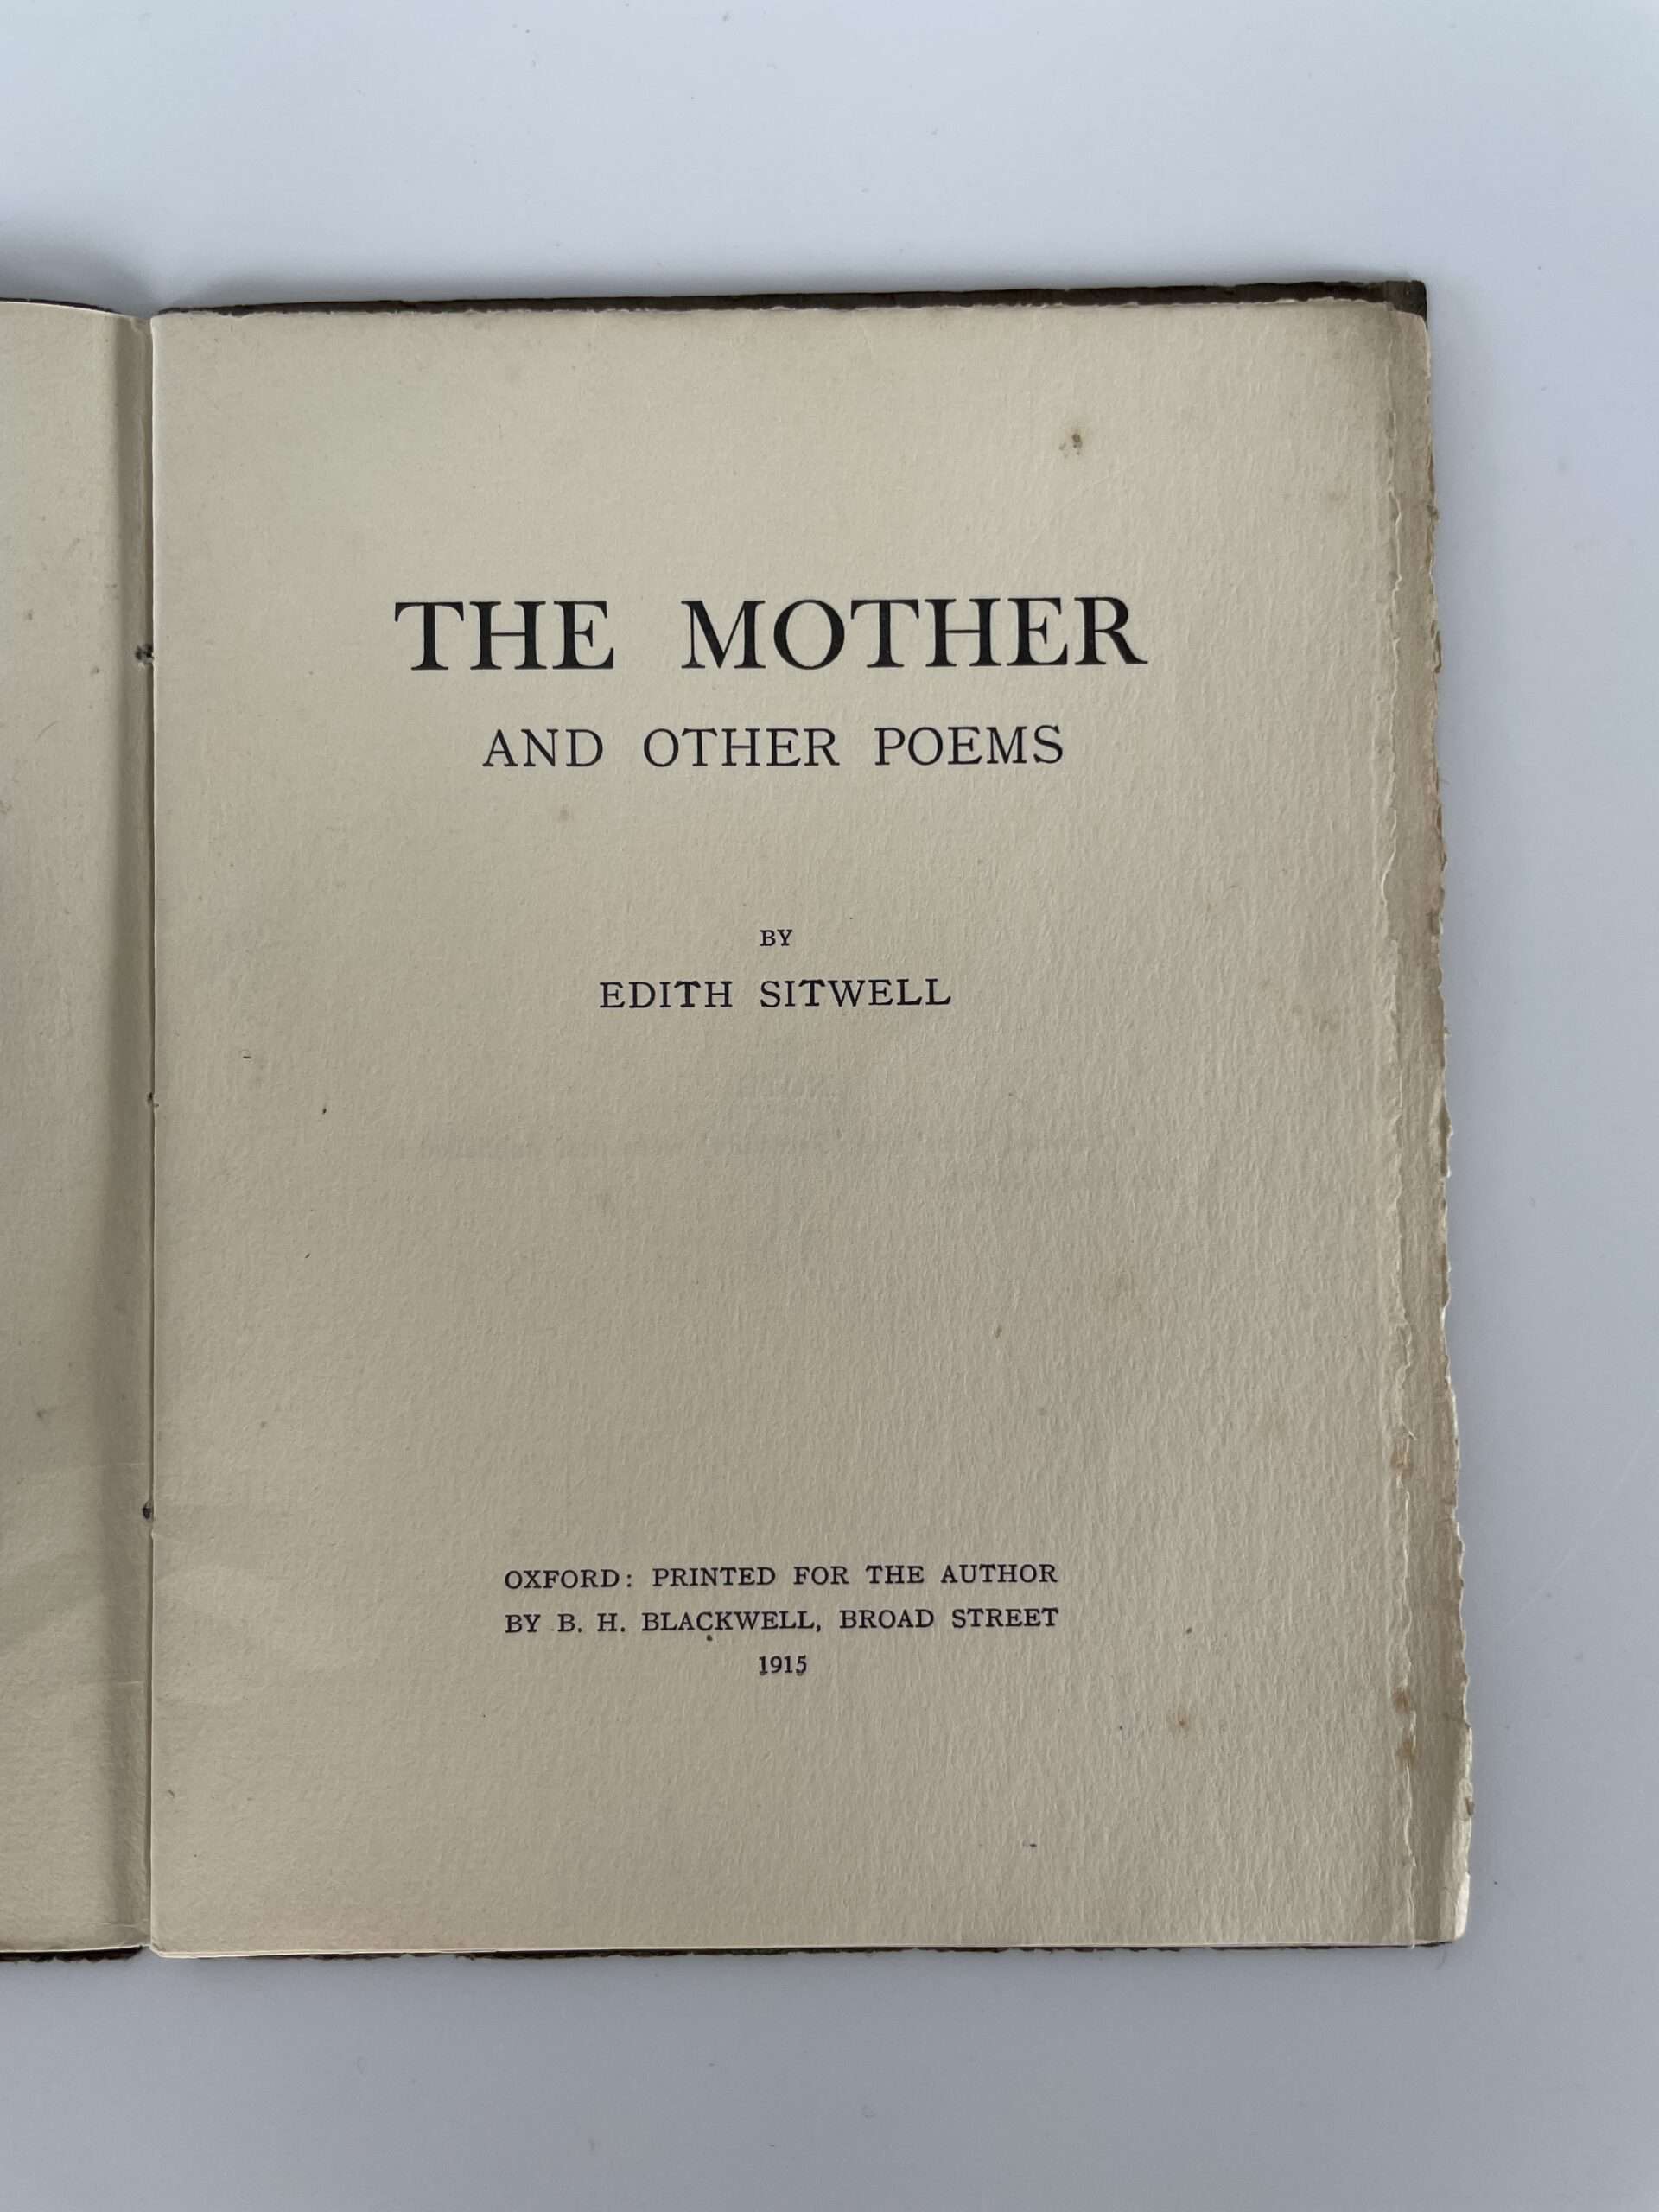 edith sitwell the mother with letter2